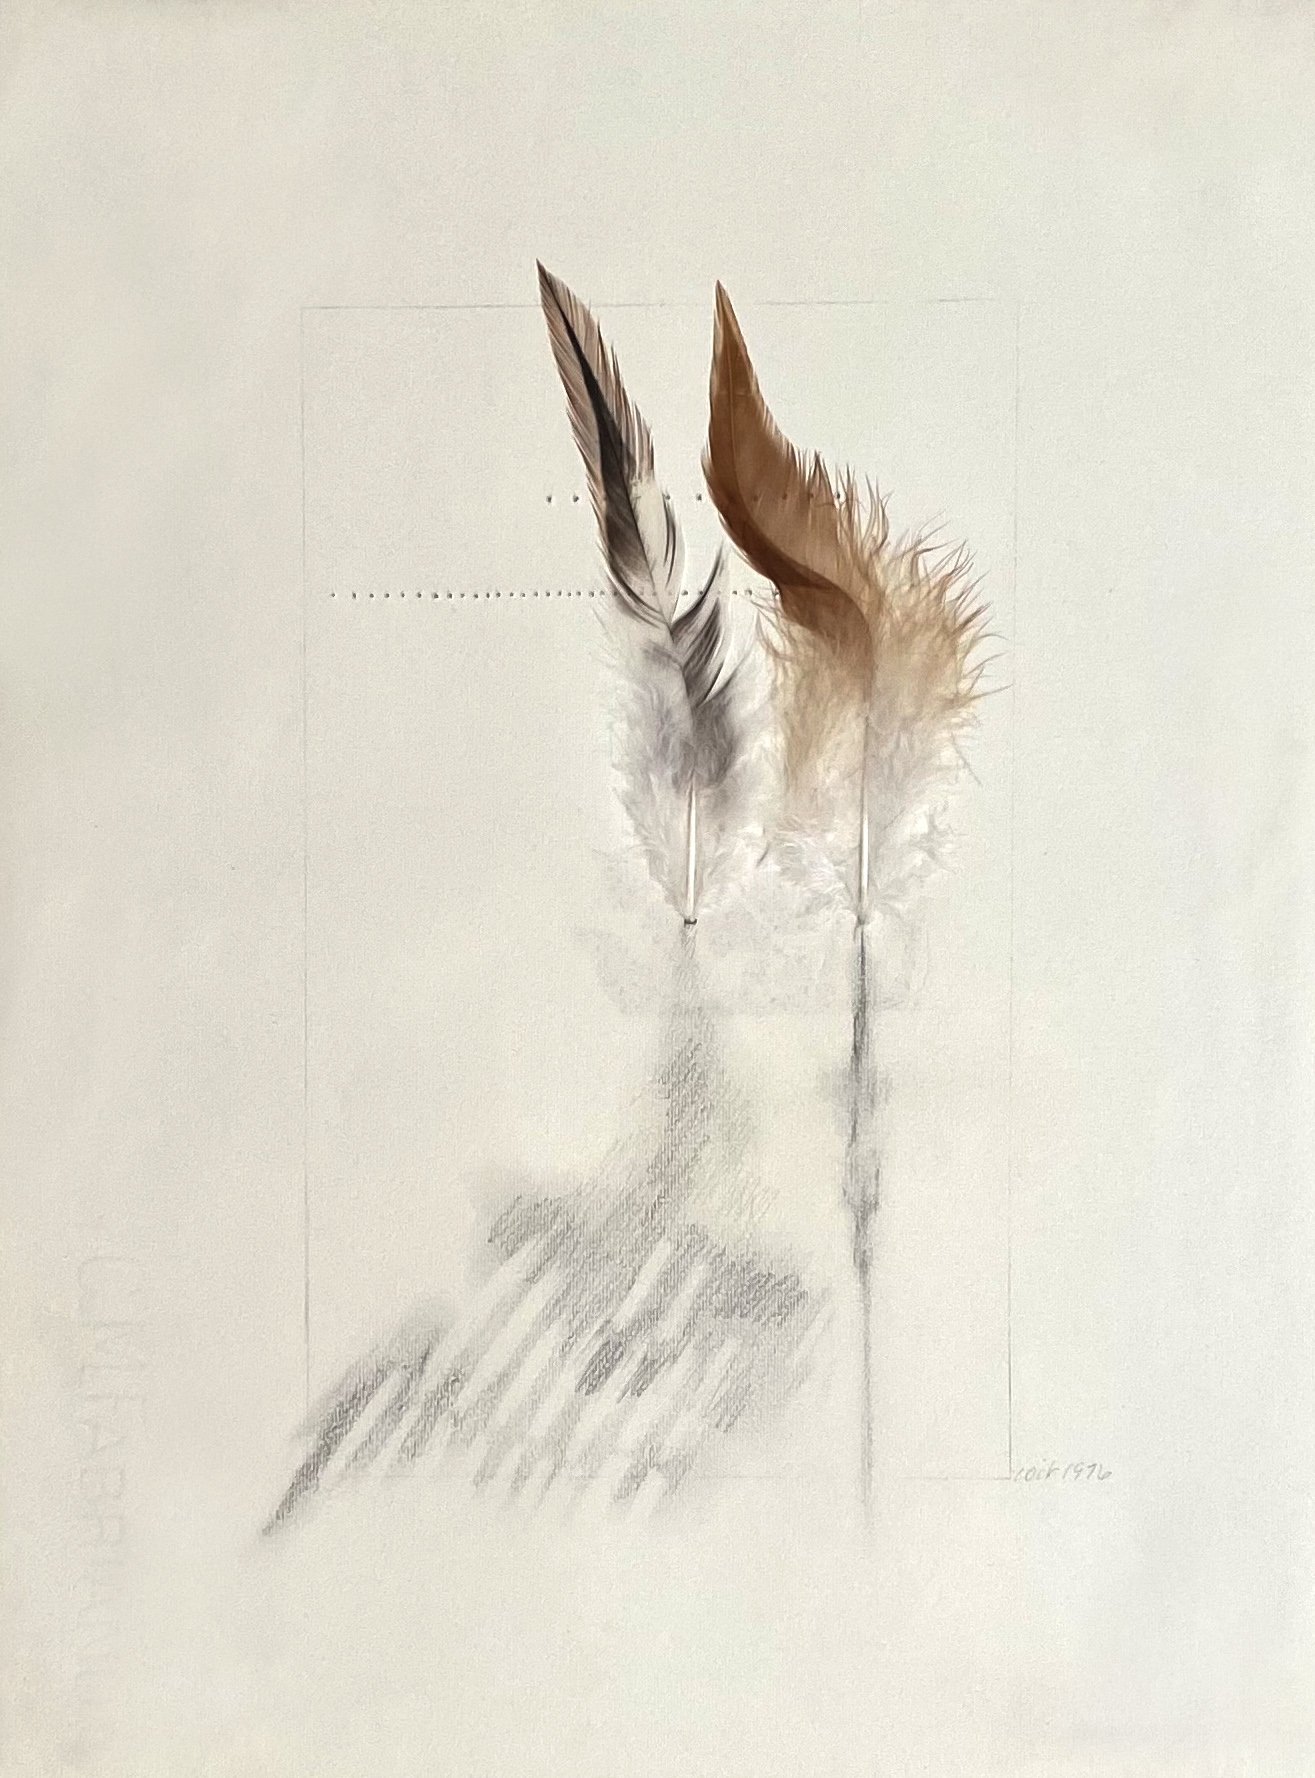 Untitled Feathers #1